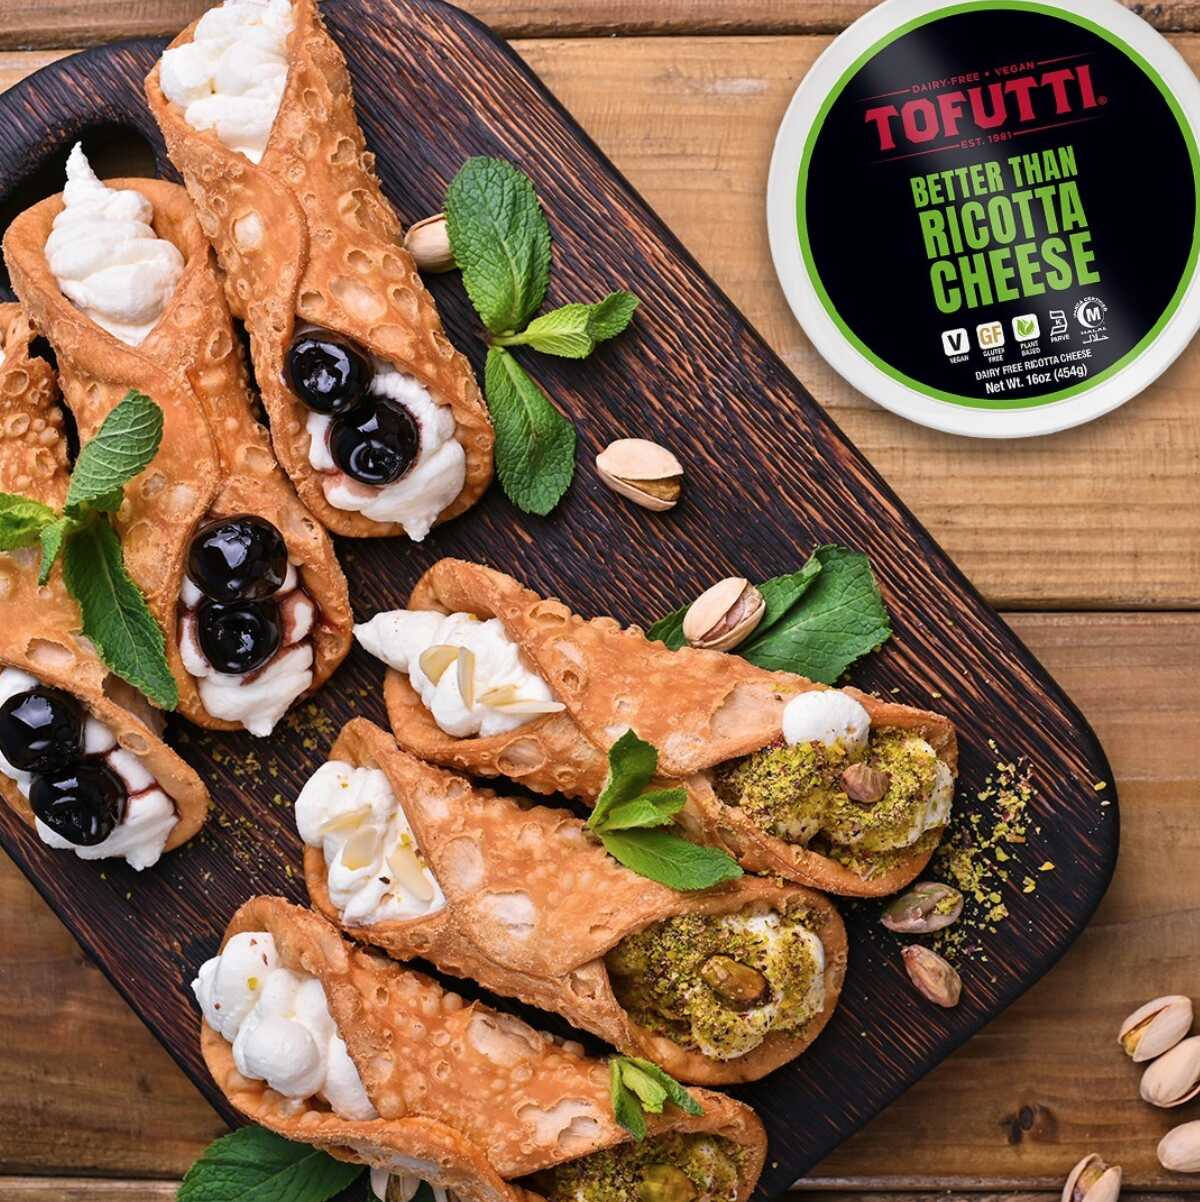 A dark wood cutting board topped with six cannolis that are filled with Tofutti vegan ricotta cheese. A black labeled plastic container of Tofutti ricotta is next to the cutting board. 